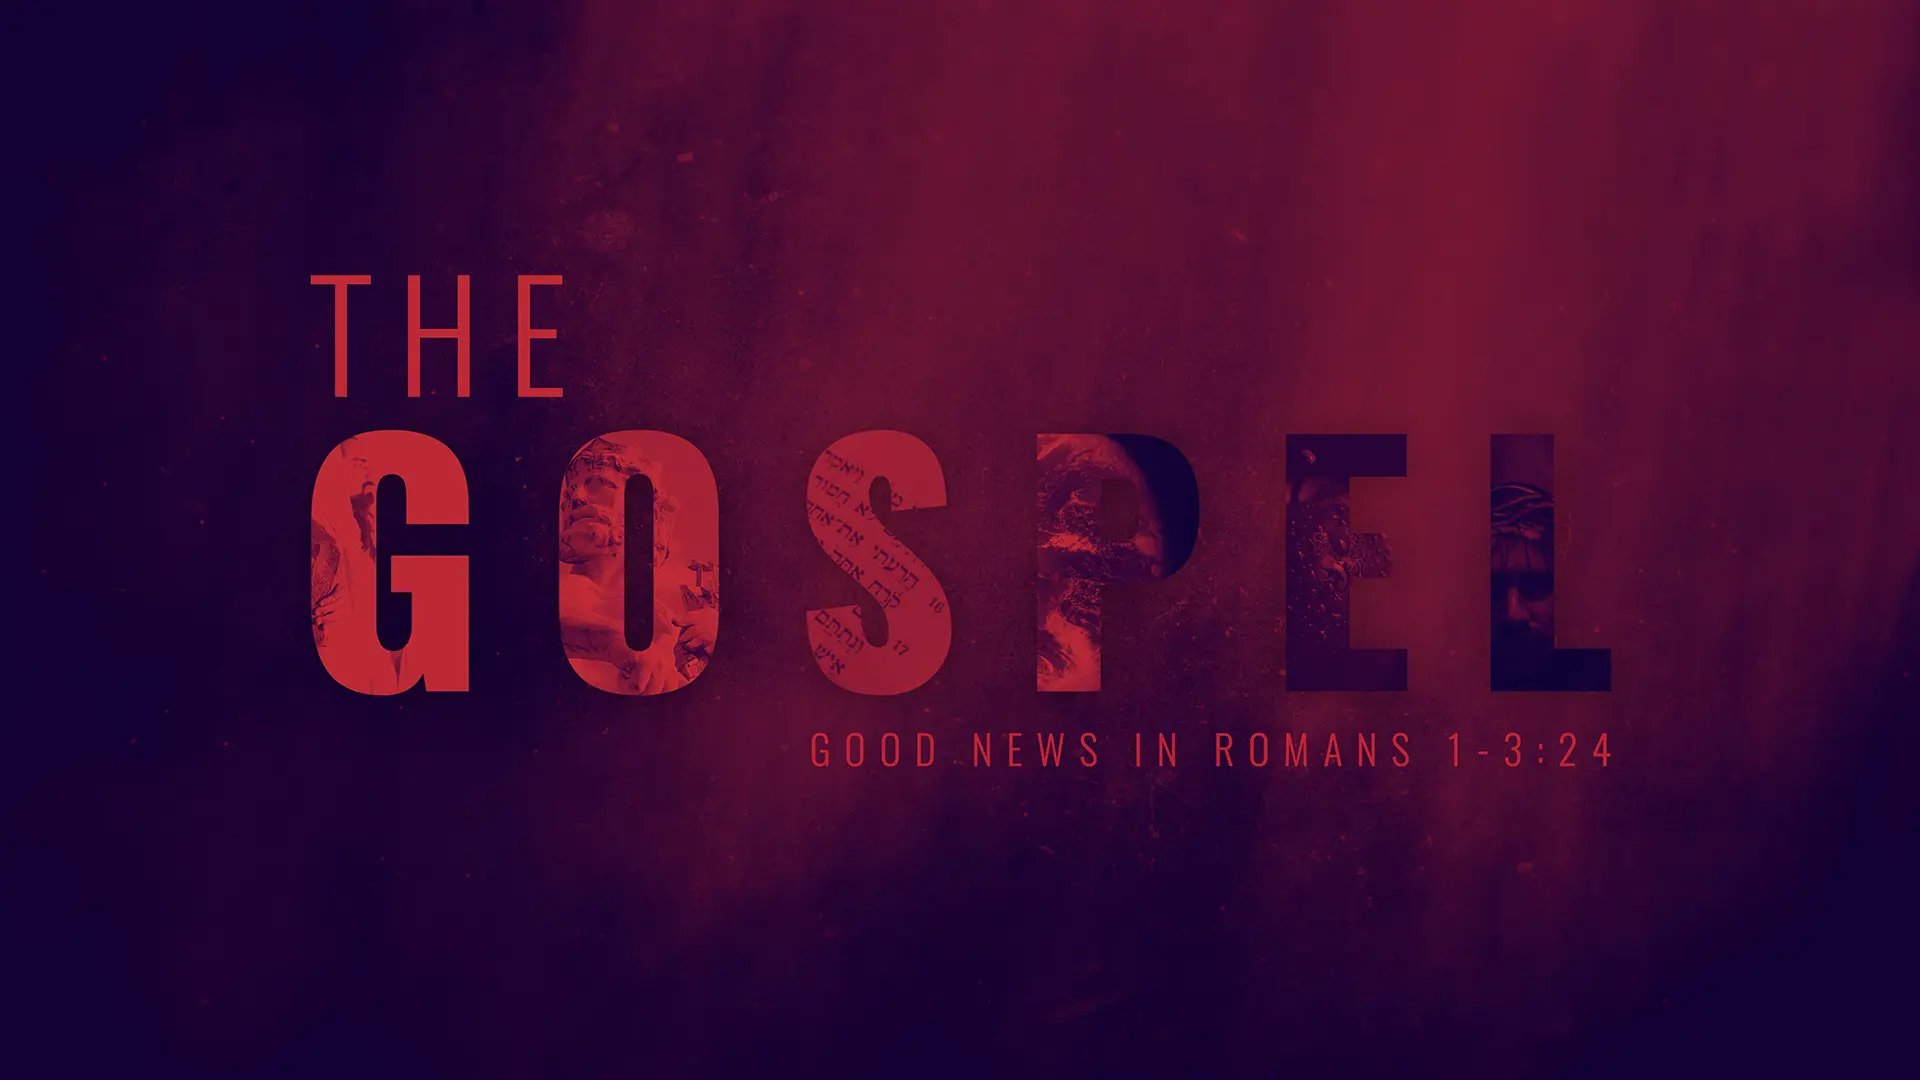 Featured image for “The Gospel”